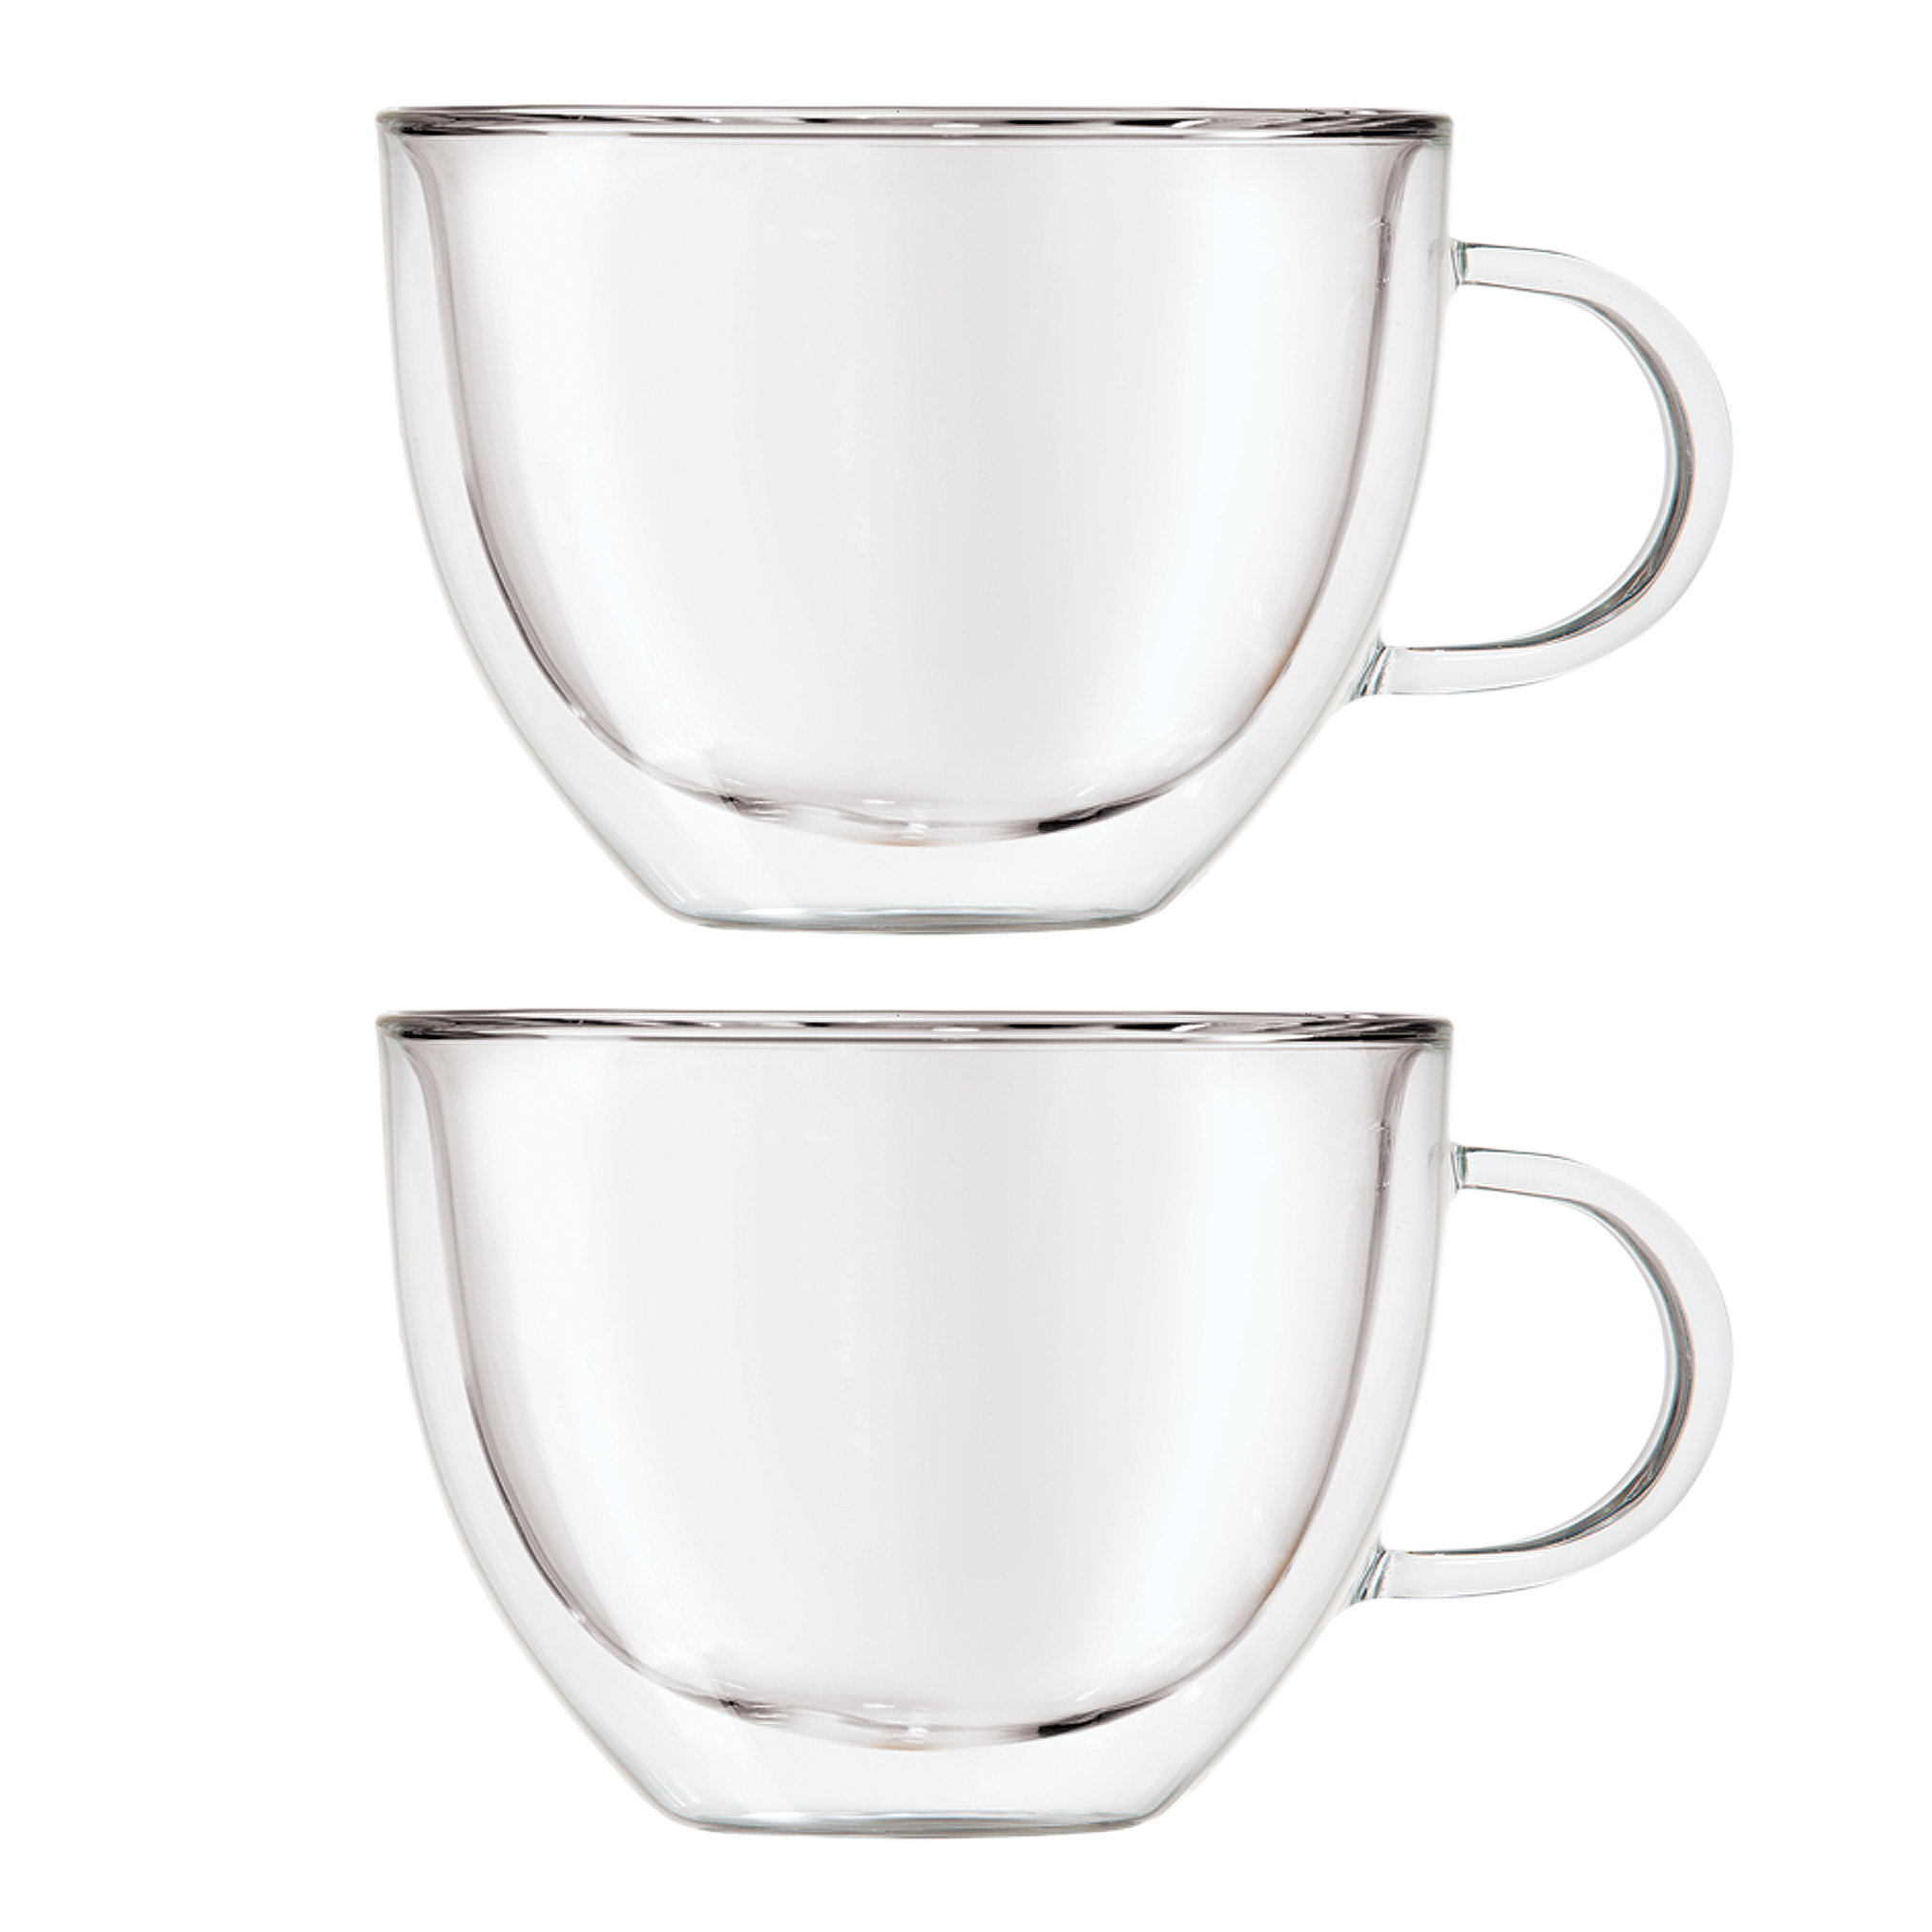 Insulated Double Wall Mug Cup Glass-Set of 4 Mugs/Cups for  Coffee,Cappuccino,latte,espresso,Tea,Thermal,Clear,475ml